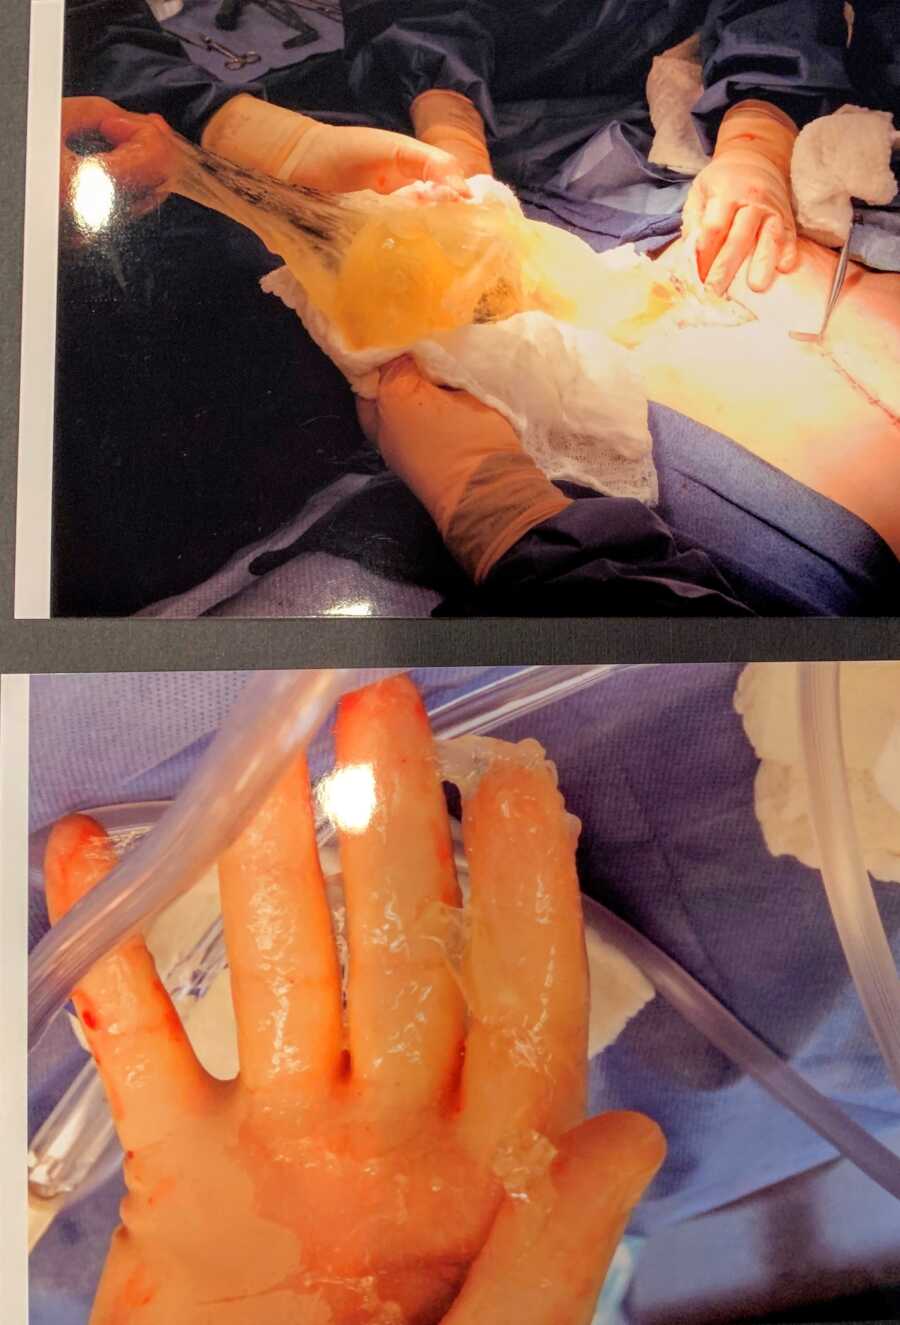 Photos of a woman in surgery getting her breast implants removed due to Breast Implant Illness and a ruptured implant